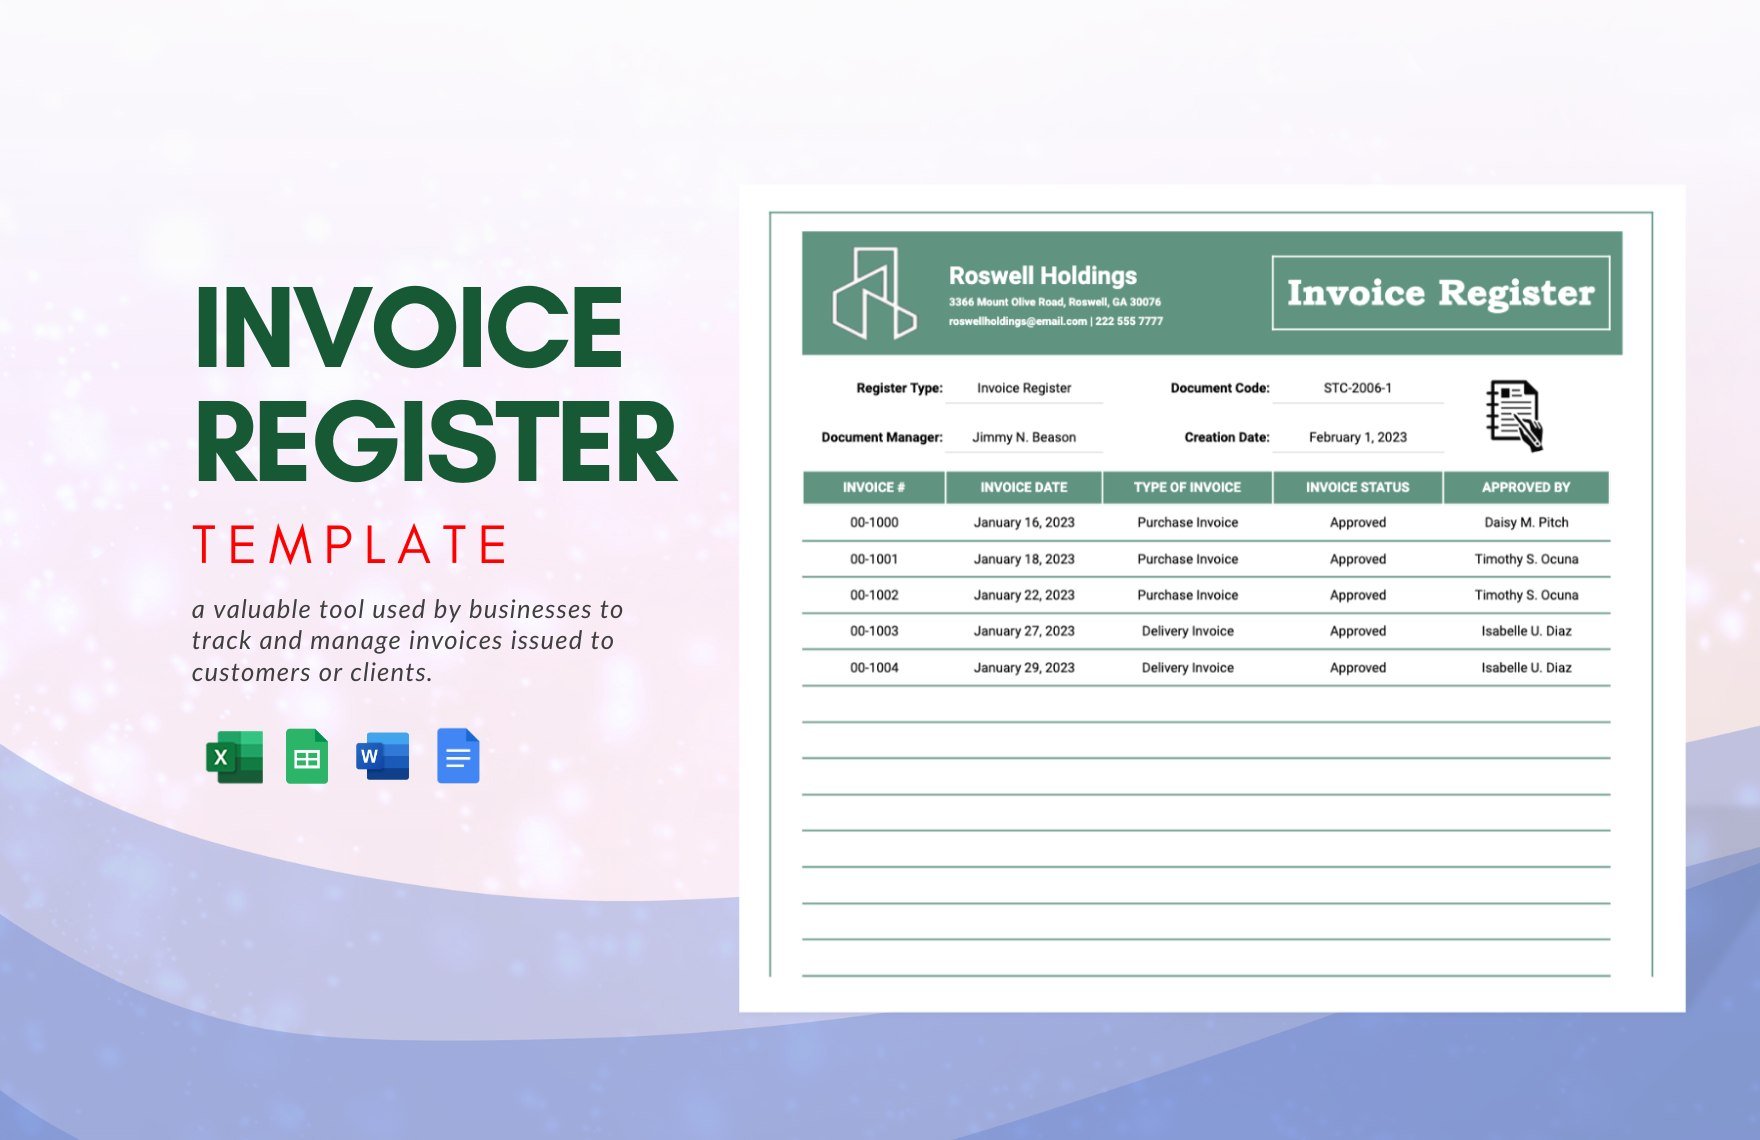 Invoice Register Template in Word, Google Docs, Excel, Google Sheets